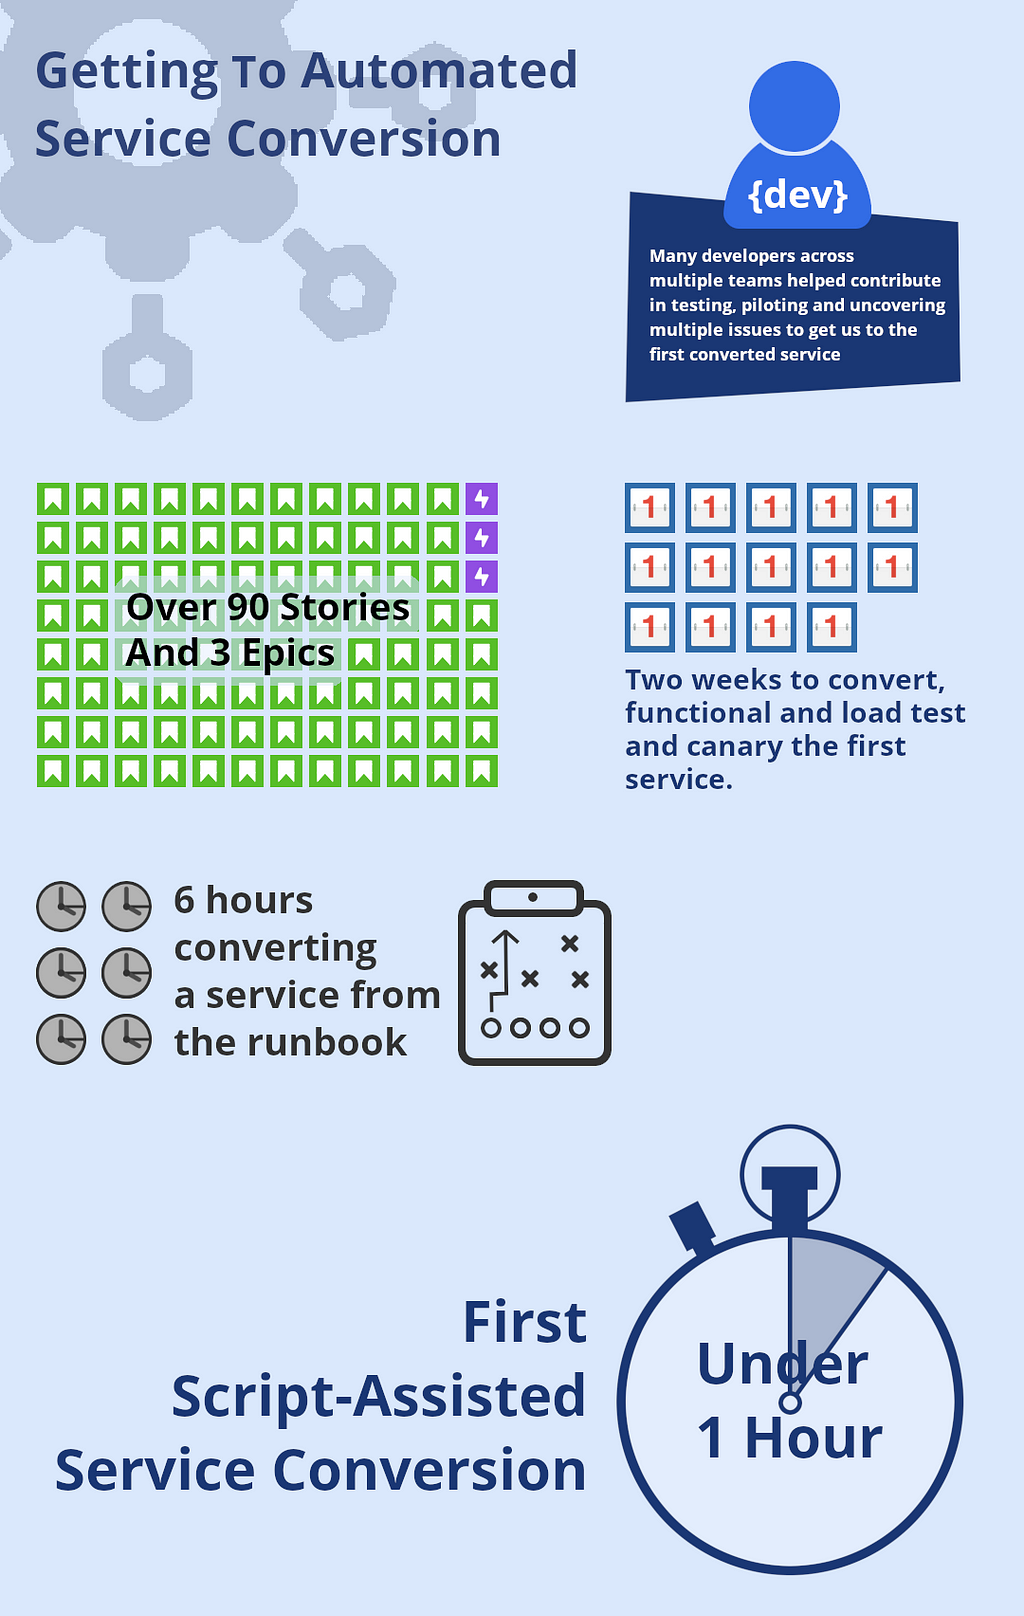 Info graphic: many developers, 90 stories, 3 epics, two weeks for the 1st service, 6 hours by runbook, under 1 hour by script